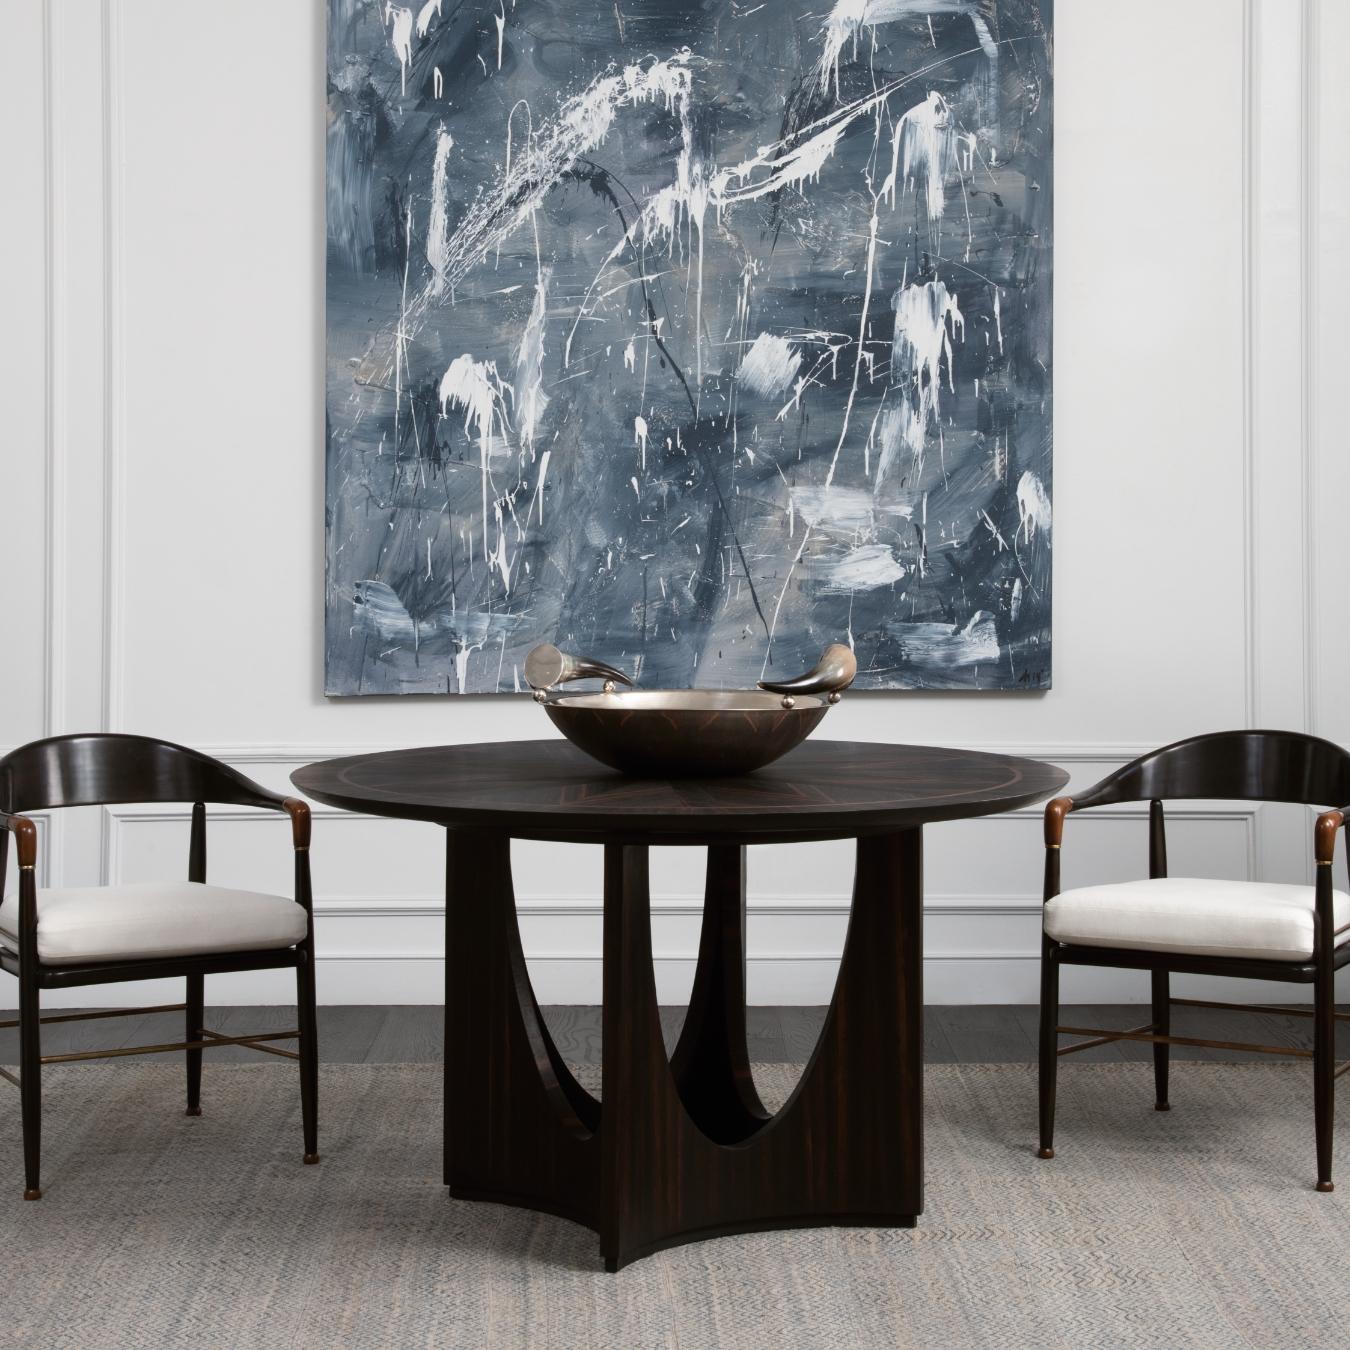 Mexican Art Deco Inspired Wood Belleuve 180 Dining Table with Ebony Veneer